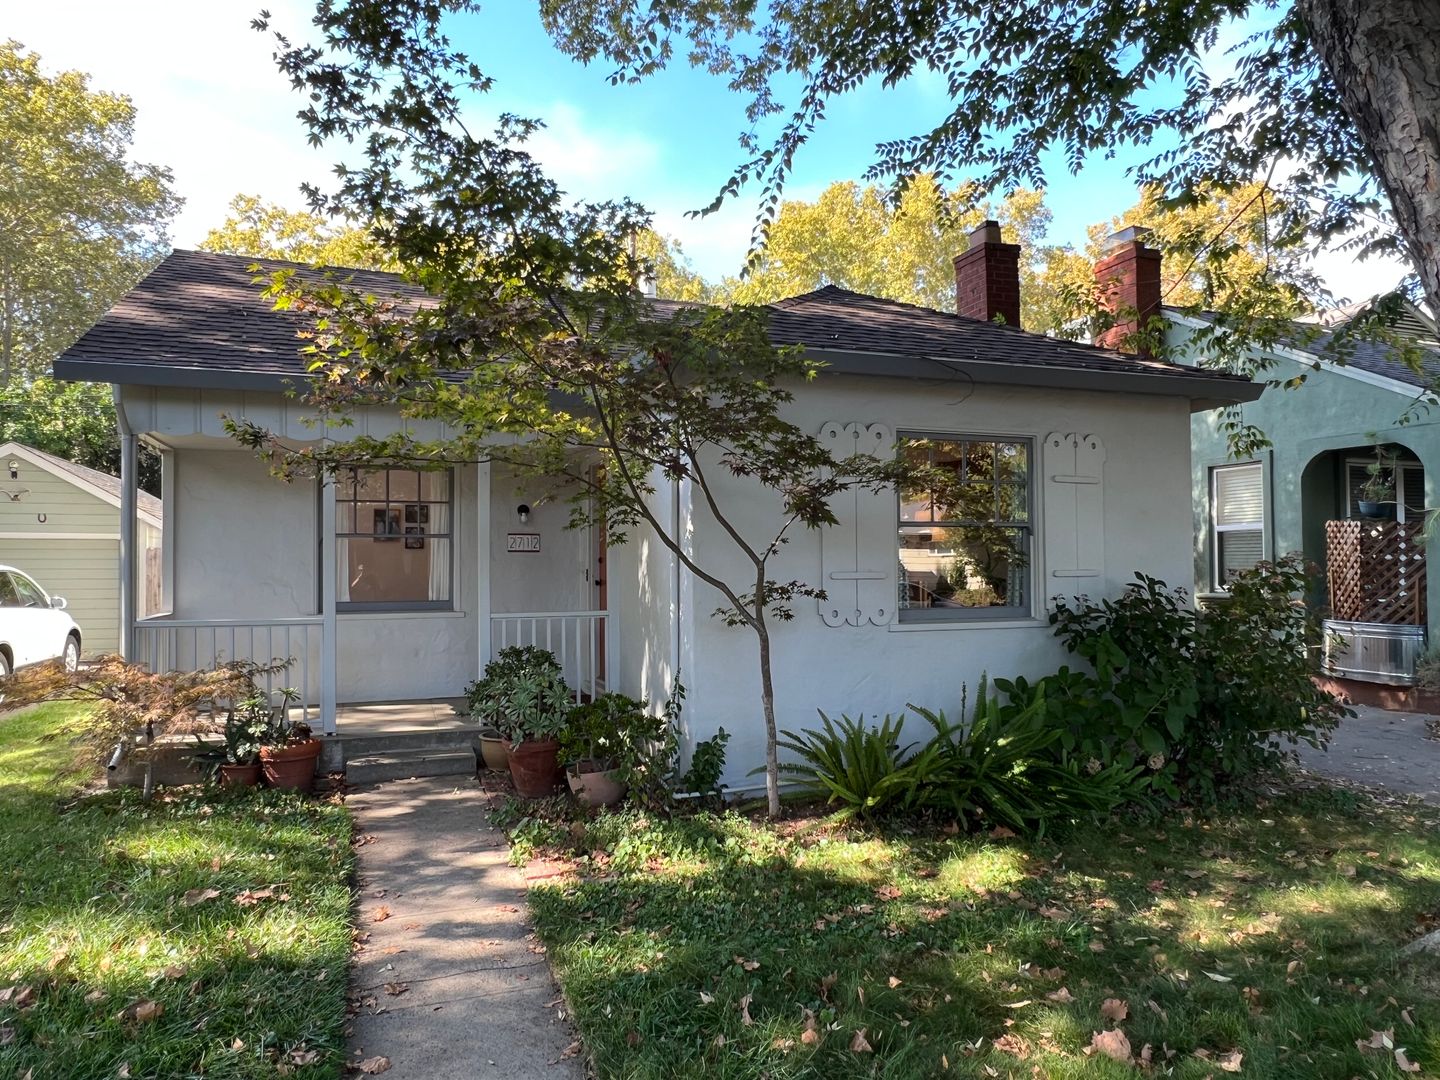 2 Bed / 1 Bath | Land Park Home Available Now